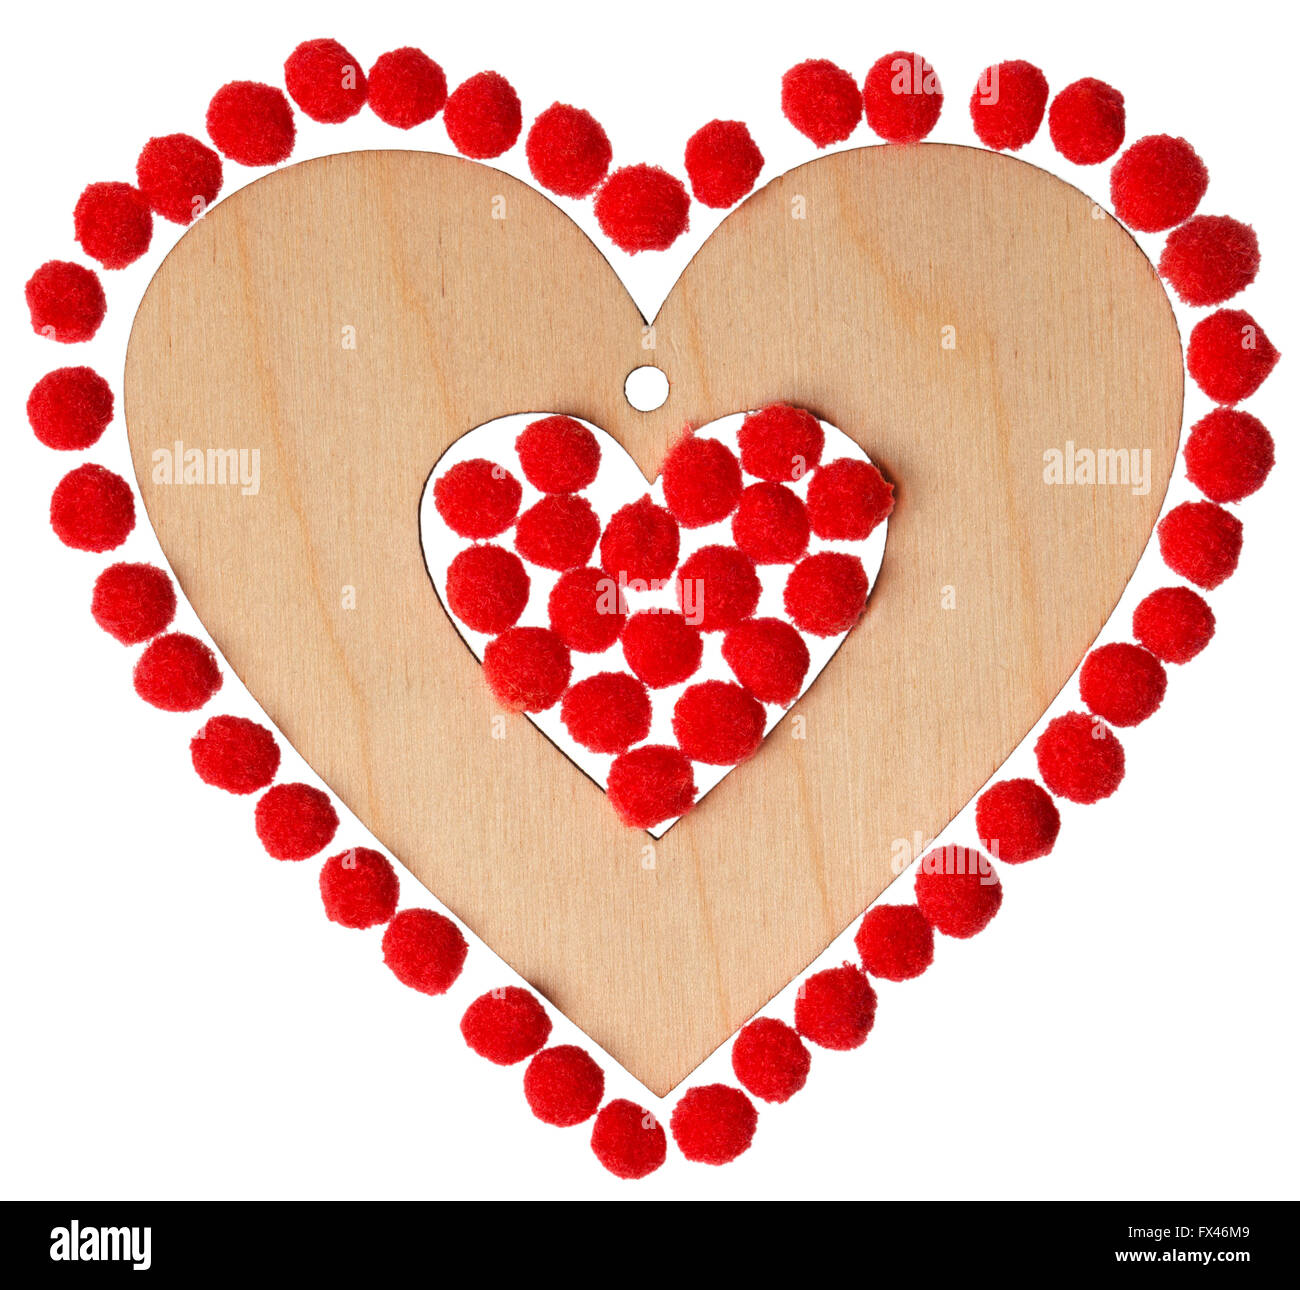 Wooden heart with red balloons isolated Stock Photo